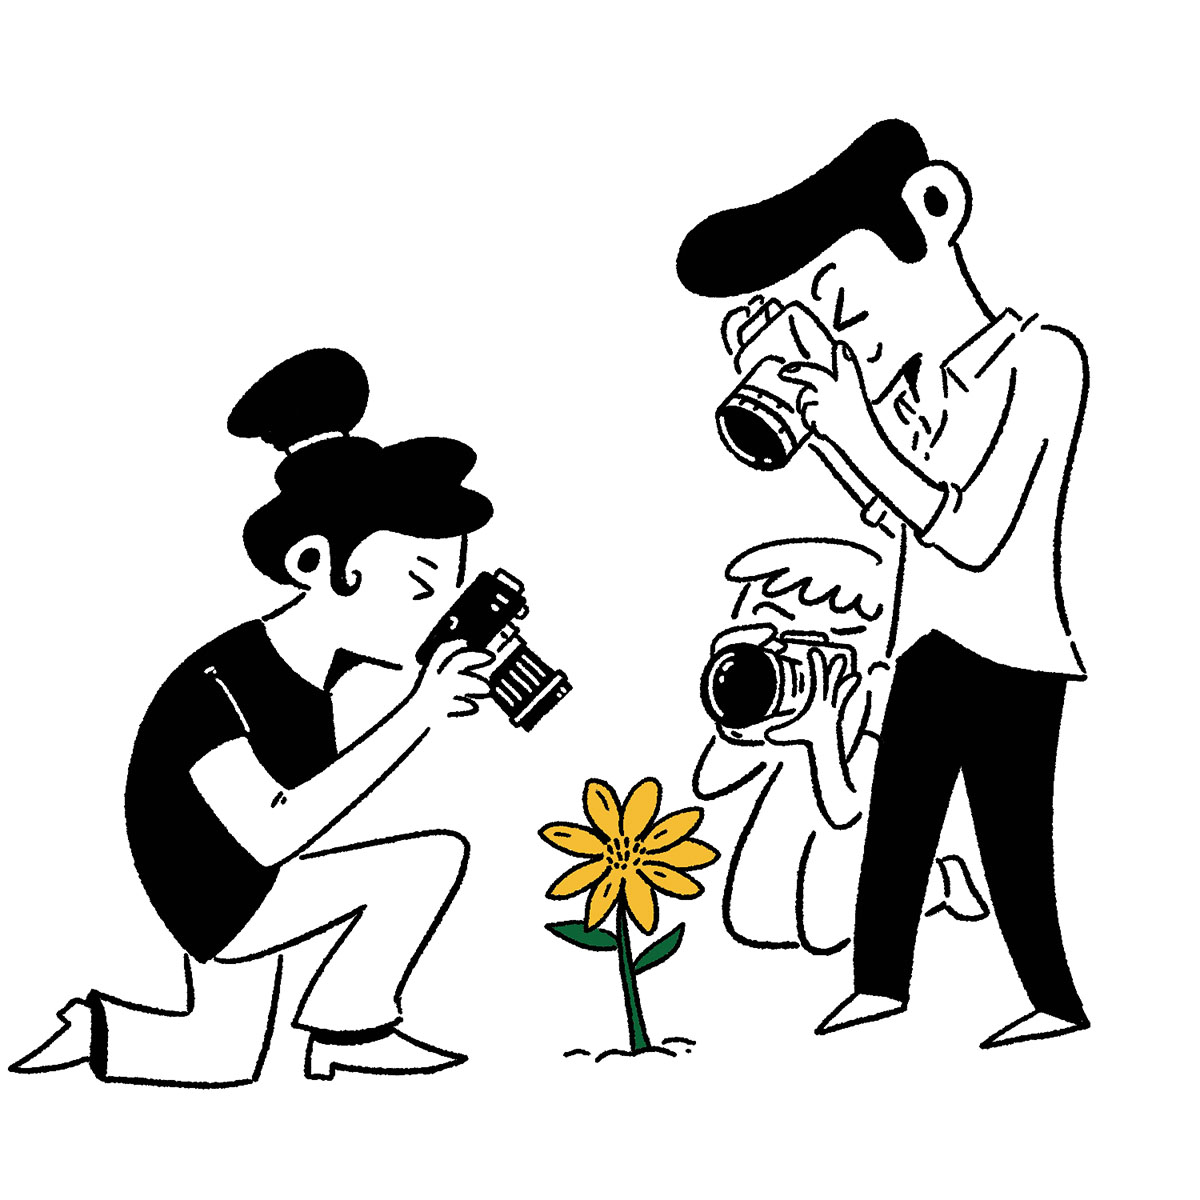 An illustration of people taking pictures of wildflowers